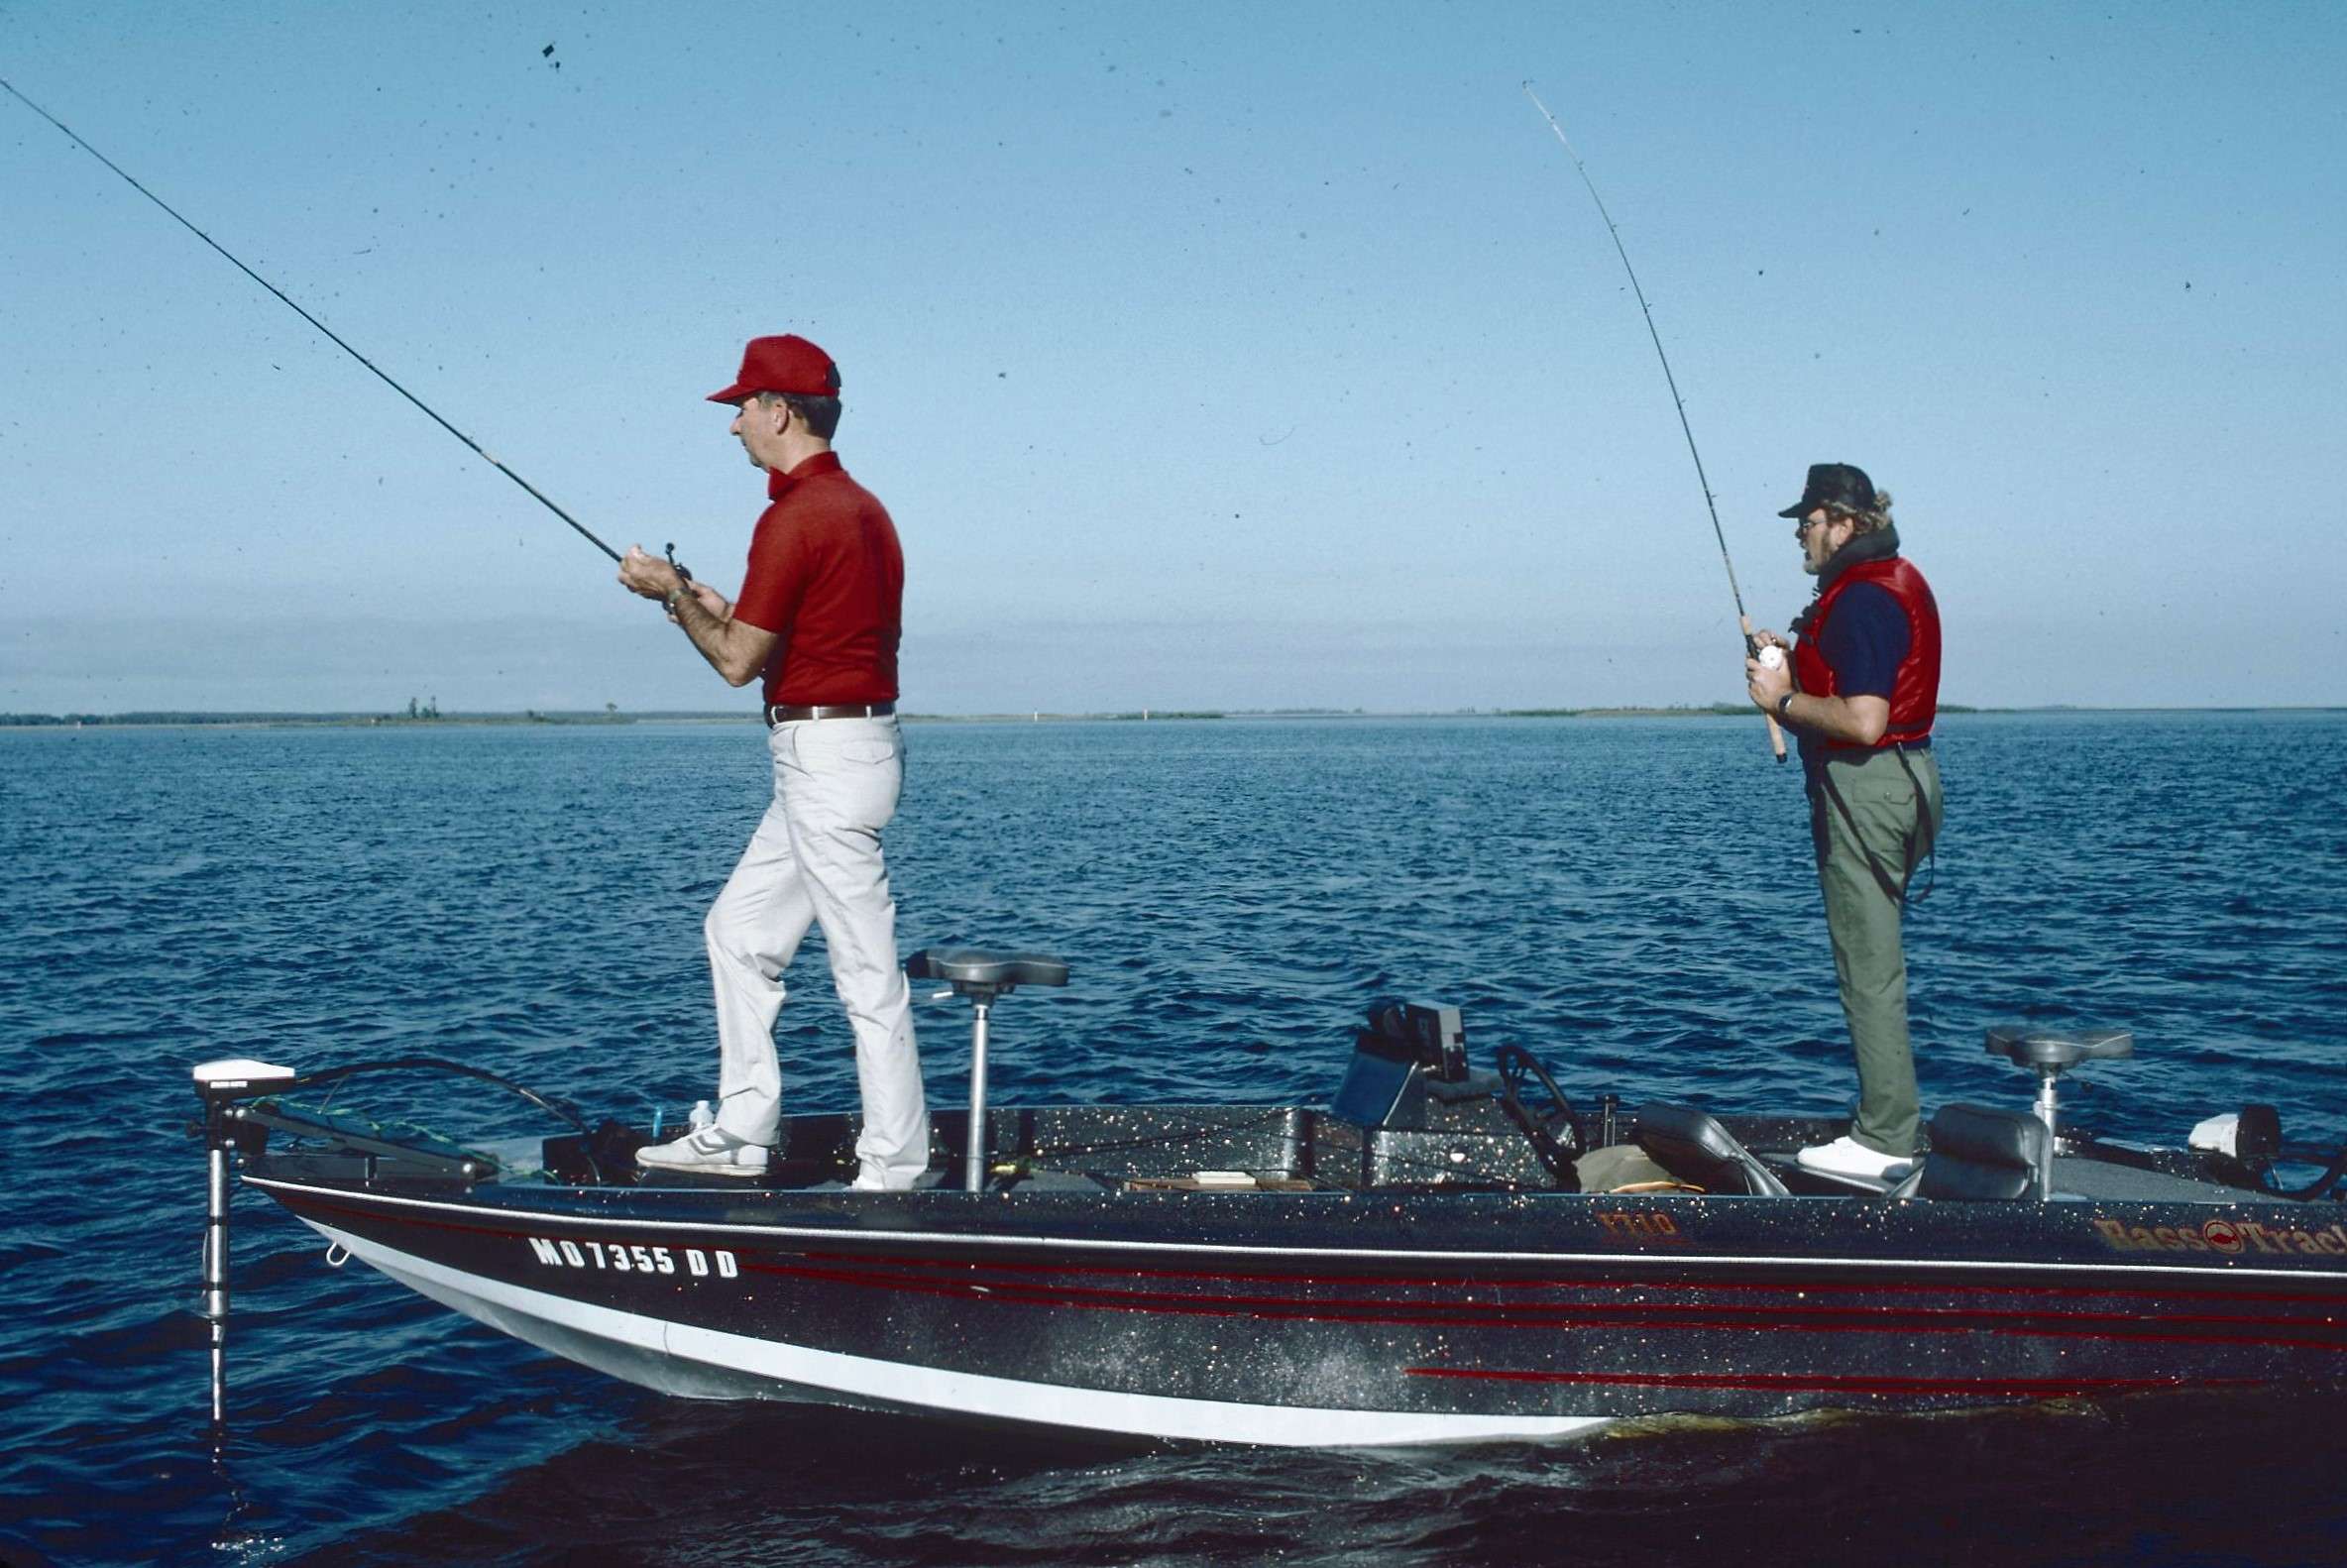   Until that event, professional anglers would be paired with each other, forcing them to share the fish they had found with an angler of equal skill. It was often highlighted by a coin flip to determine whose boat would be taken for the day and whose fish would be traveled to and when. Those niceties were scrapped for this contest, at the request of the pros. âThe pros have been asking for a tournament where they can control their destiny for the day,â said Ann Lewis, long-time communications director of B.A.S.S. âSince the pros wonât have to leave their fish to go to their partner's fish, there should be much larger stringers.''